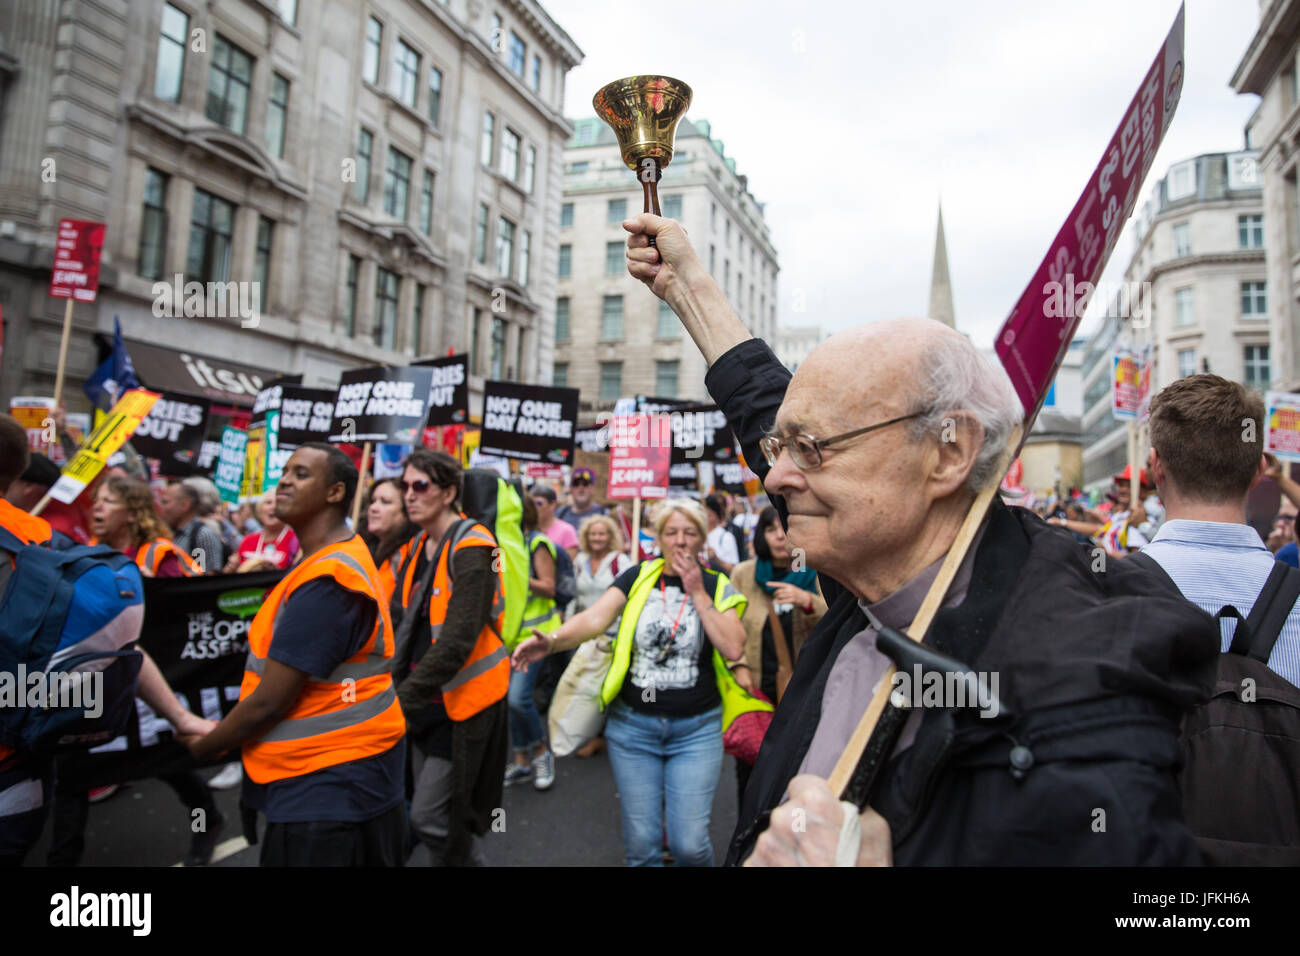 London, UK. 1st July, 2017. The Rev. Paul Nicolson rings a bell as thousands of people from many different campaign groups and trade unions pass on the Not One More Day national demonstration organised by the People's Assembly Against Austerity in protest against continuing austerity, cuts and privatisation and to call for a properly funded health service, education system and housing. A minute's silence was also held for the victims of the fire at Grenfell Tower. Stock Photo